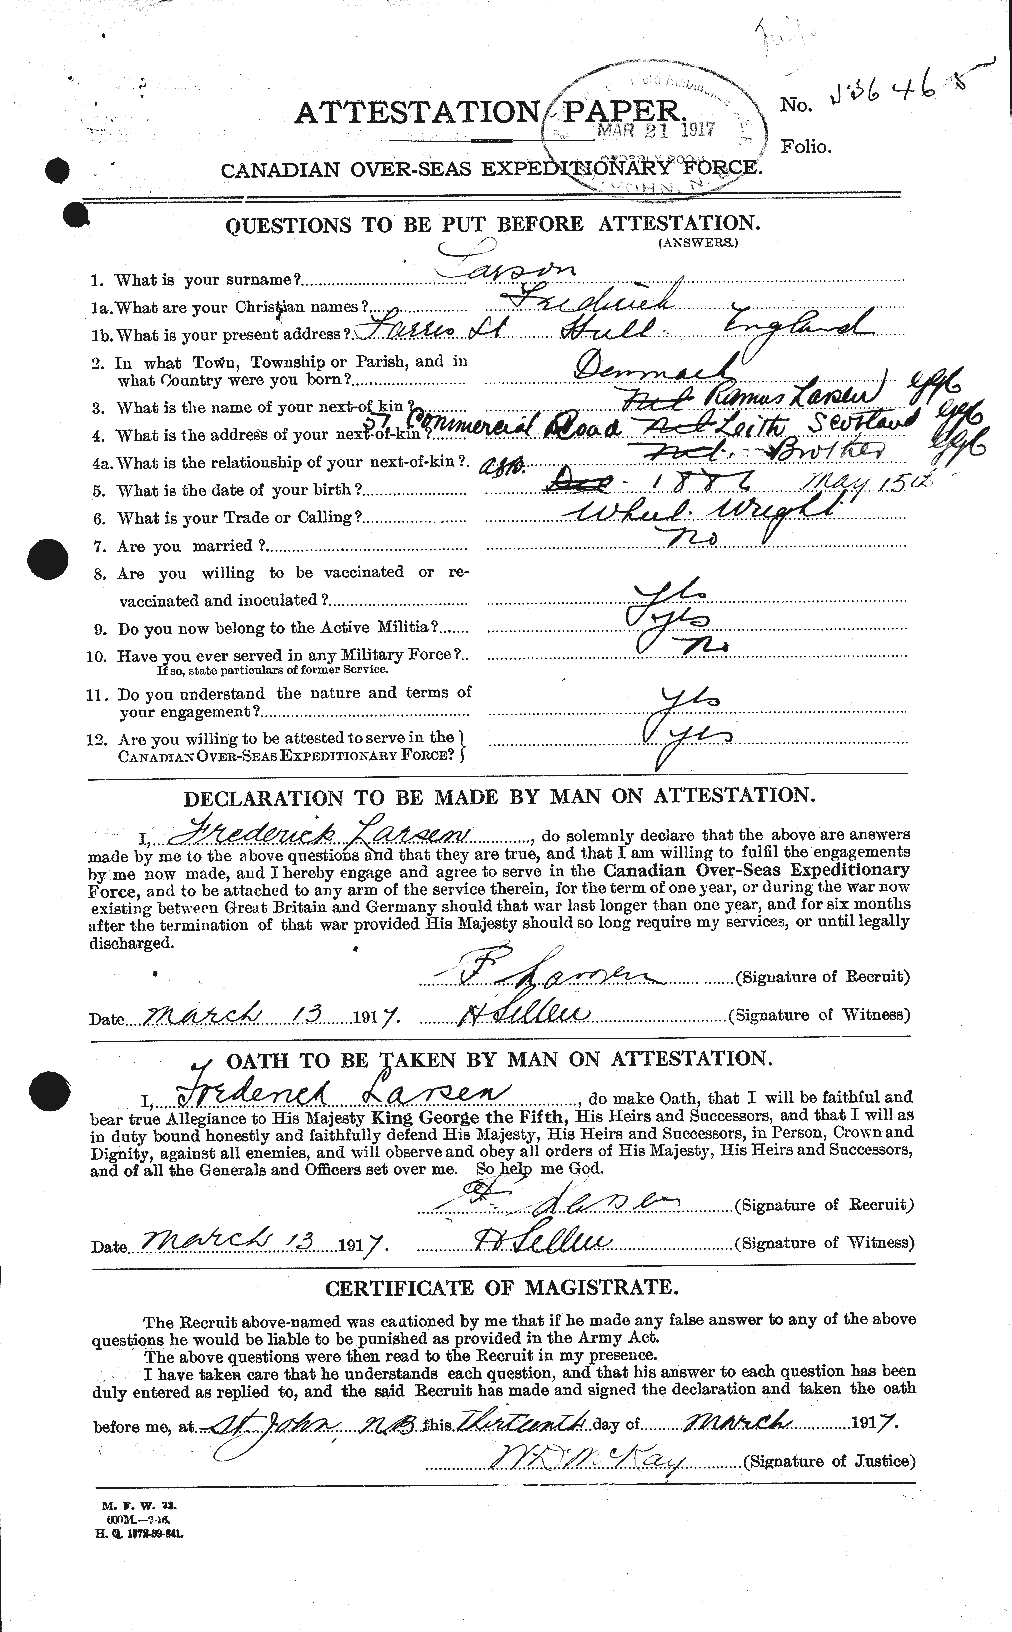 Personnel Records of the First World War - CEF 451697a